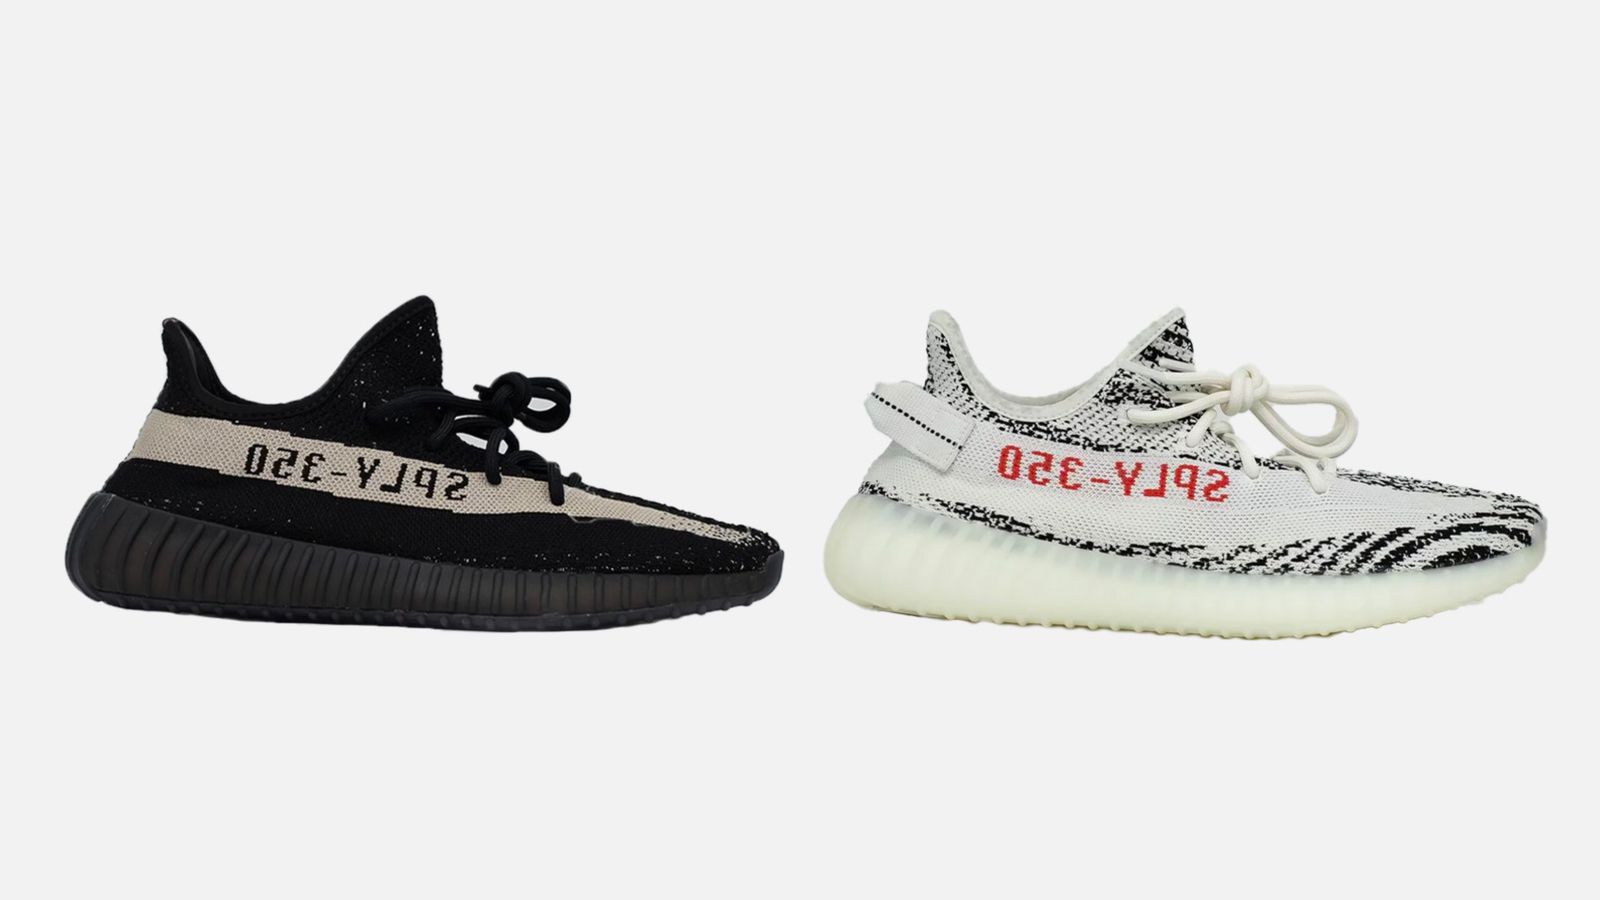 Yeezy sneakers in hot demand on resale platforms even after Kanye West's  anti-semitic remarks